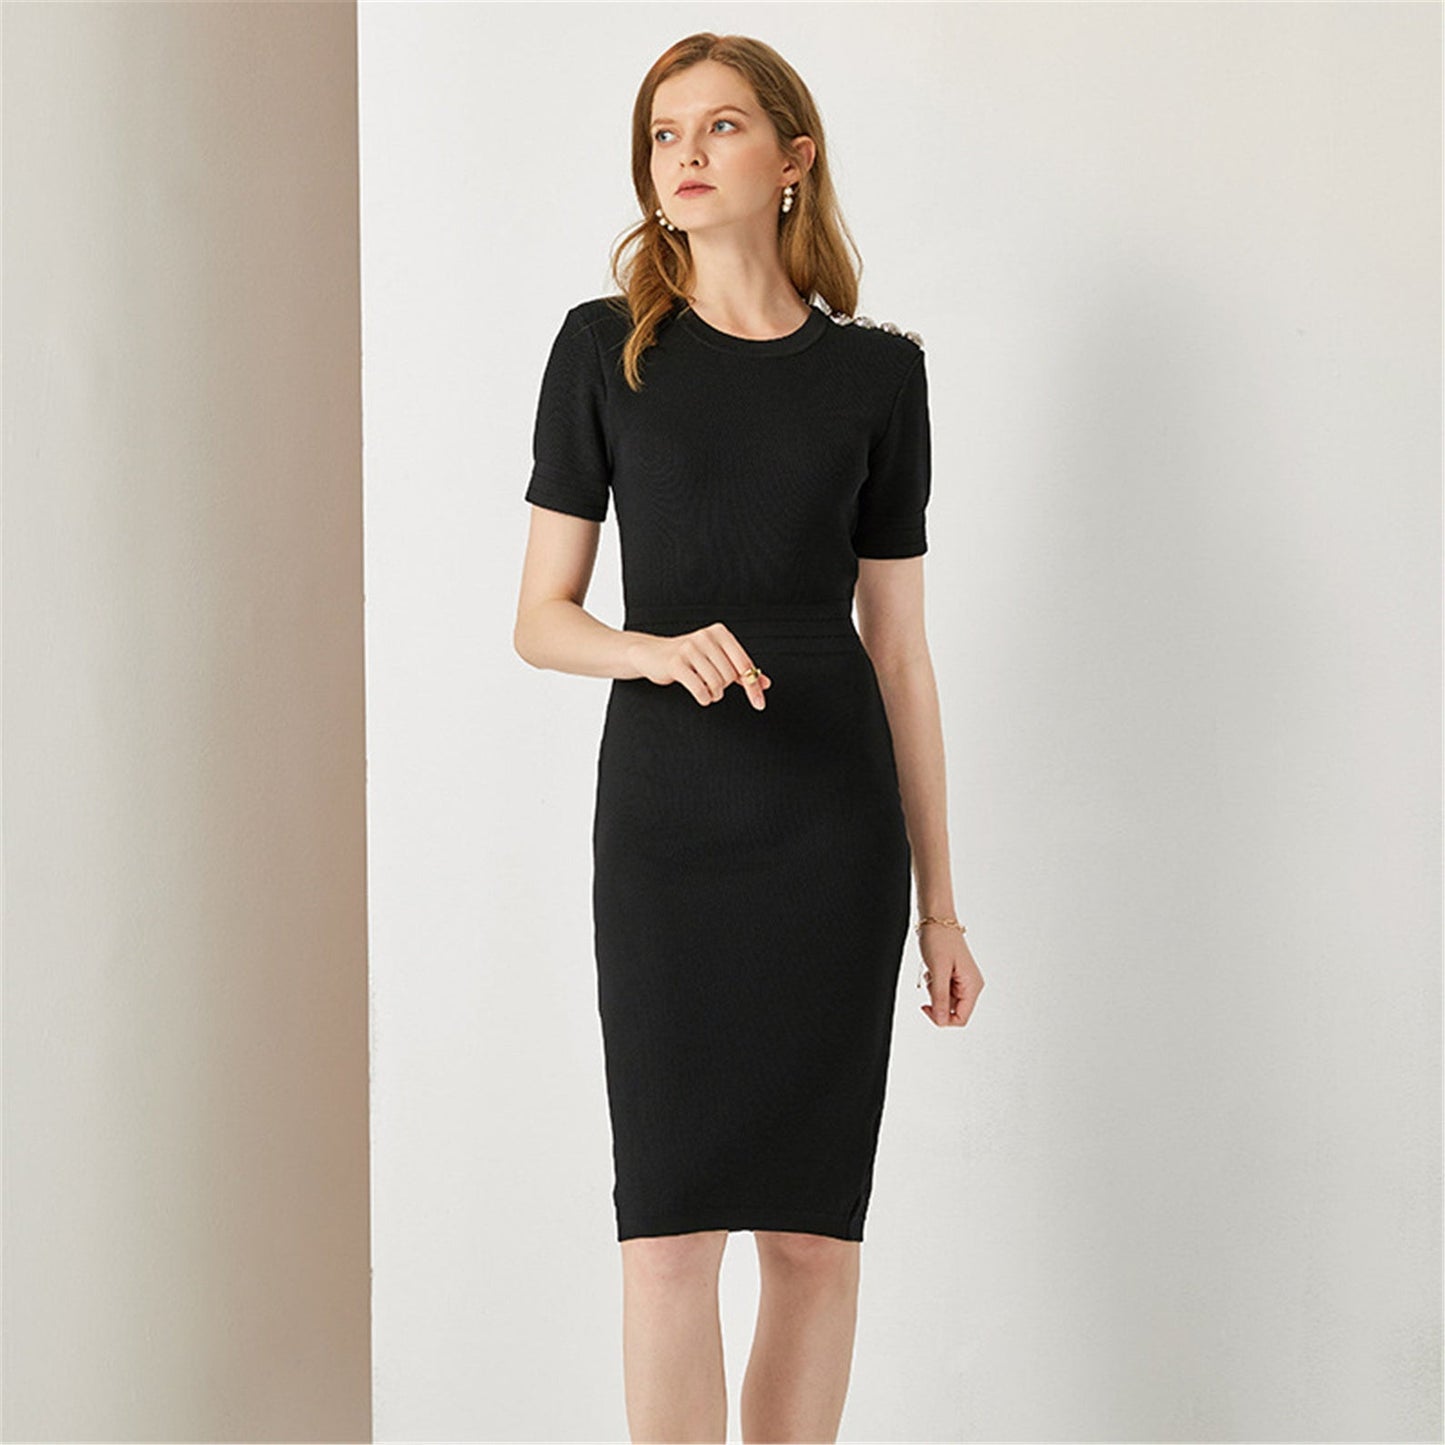  Women's Round Neck Bodycon Midi Dress 2 Colours  UK CUSTOMER SERVICE!   Women's Round Neck Bodycon Midi Dress 2 Colours - Business and pleasure combine in this mini dress. In a relaxed, Inspired shape and a fine-knit construction, this piece looks just as at home in an important meeting as it does at your favourite bar. This dress is made from our signature stretch fabric to flatter your curves. With a round cut neck line and straps, this simple, understated yet sexy dress will make sure you look hot.